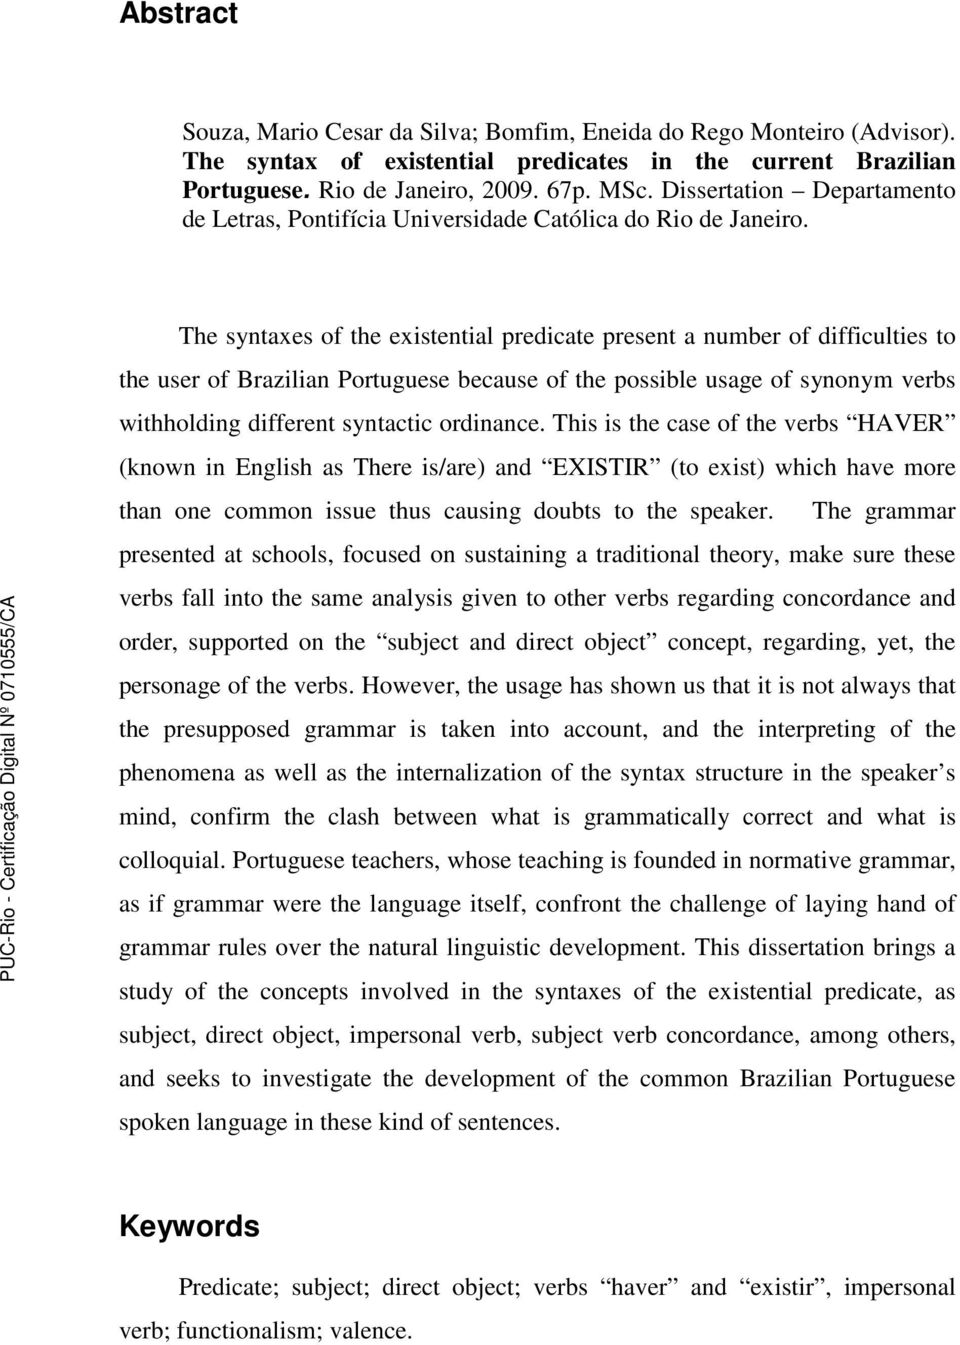 The syntaxes of the existential predicate present a number of difficulties to the user of Brazilian Portuguese because of the possible usage of synonym verbs withholding different syntactic ordinance.